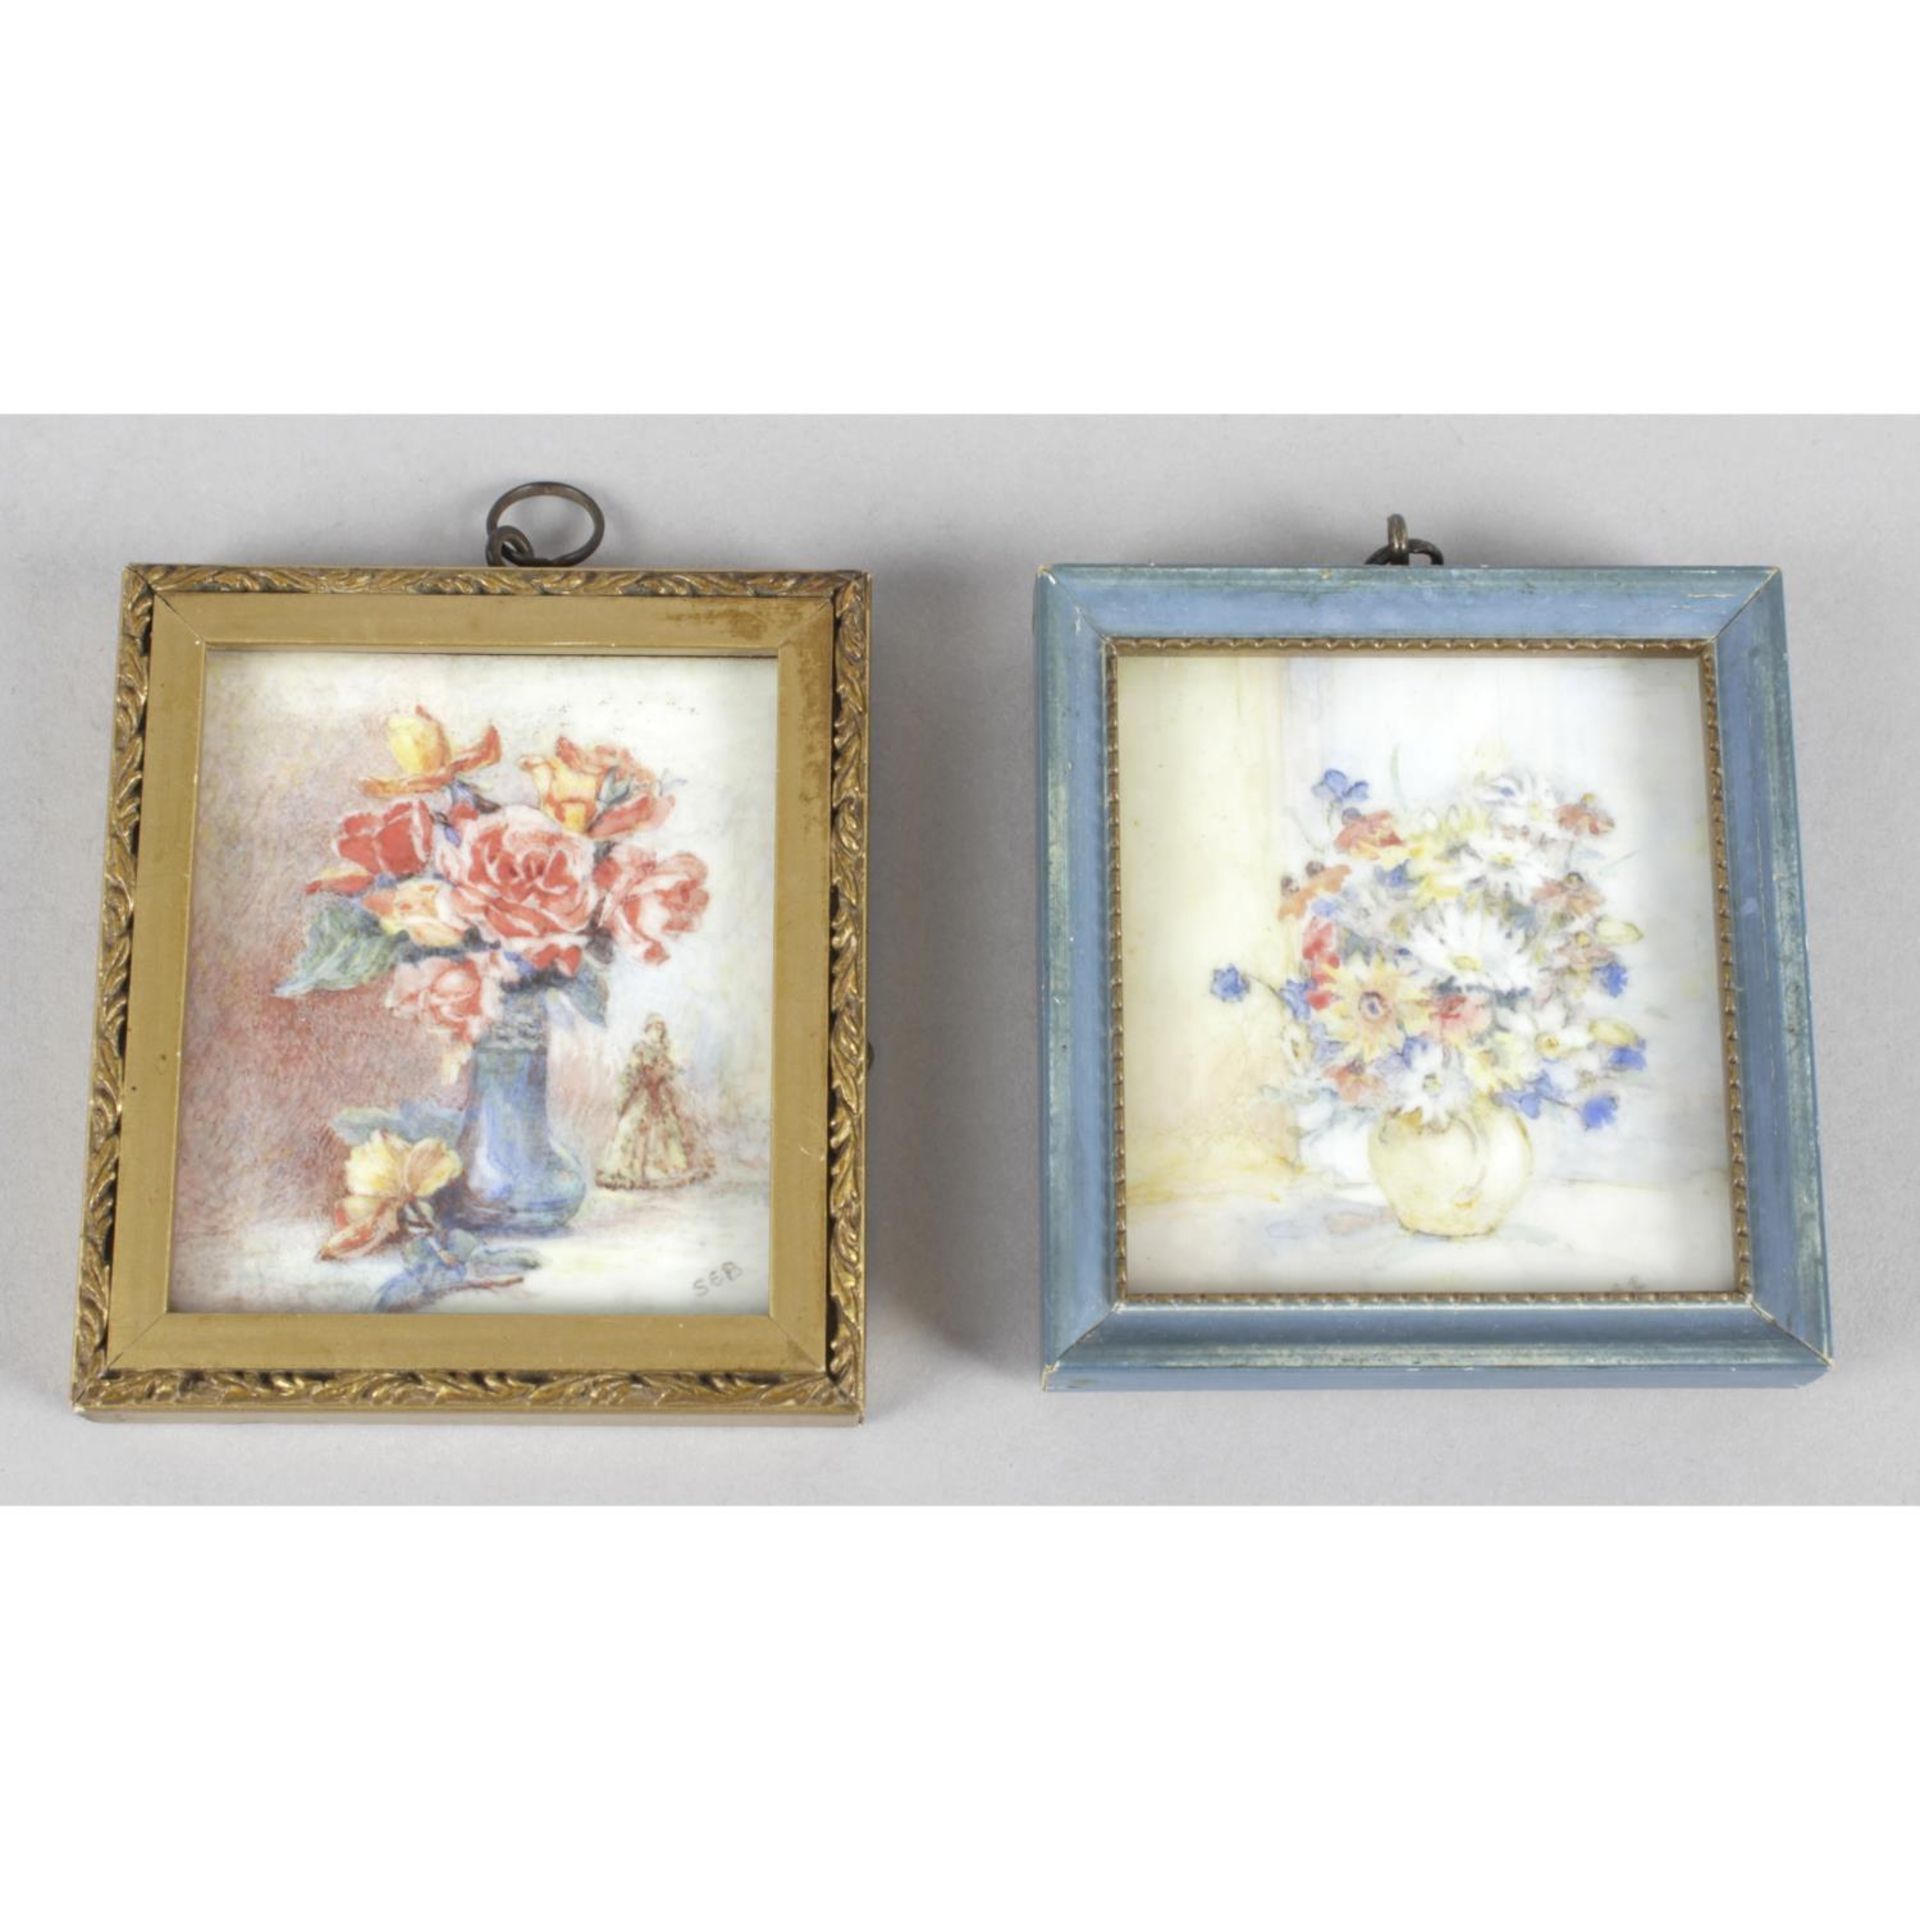 Two miniature paintings upon opaque glass panels,